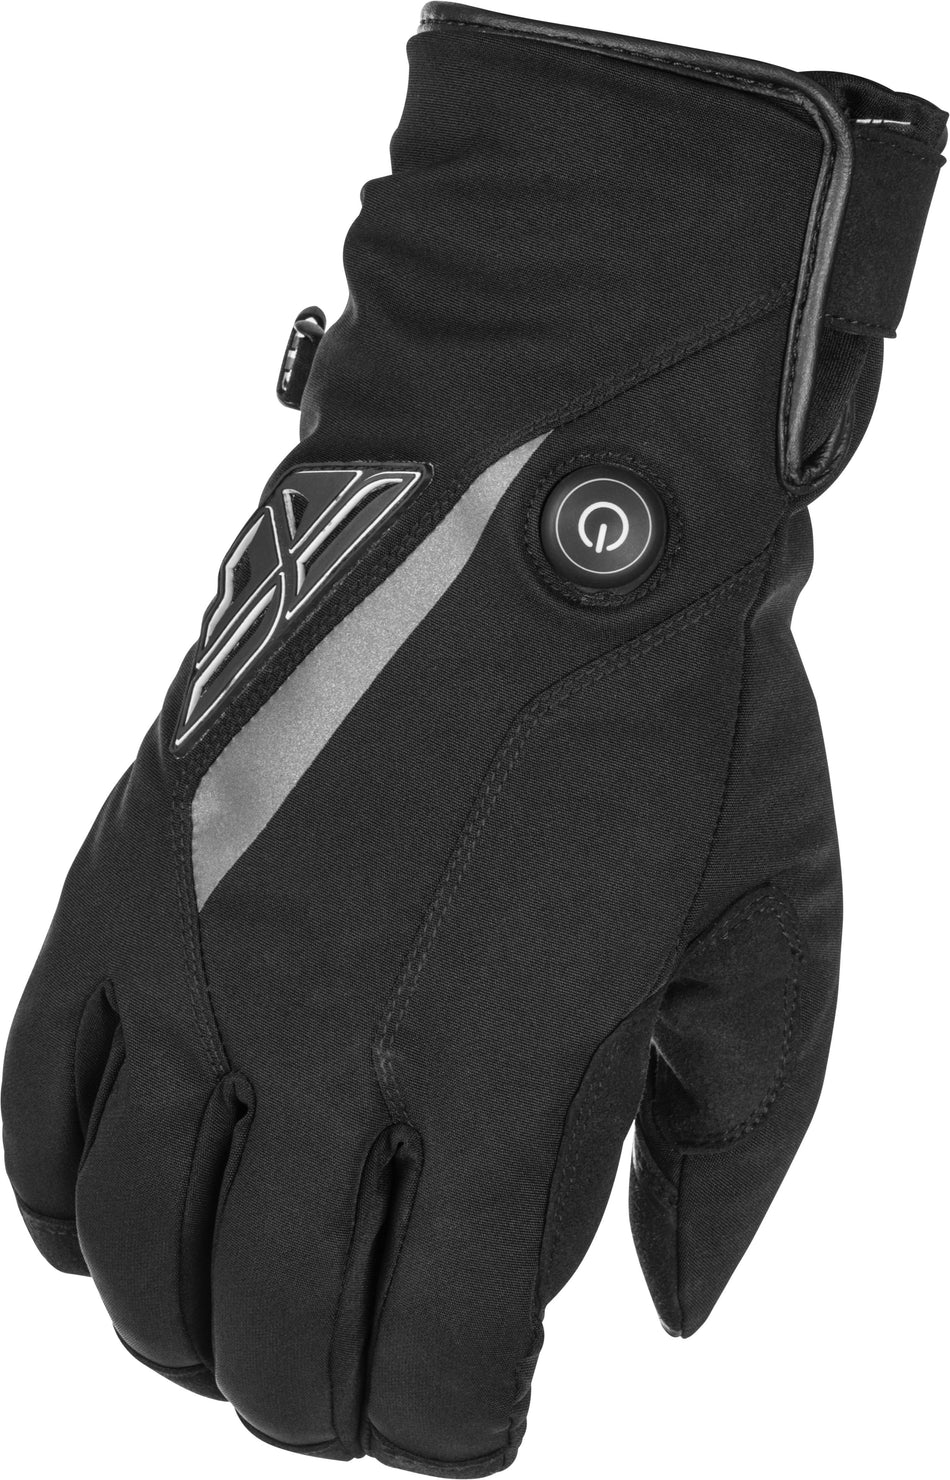 FLY RACING Title Heated Gloves Black Sm 476-2930S